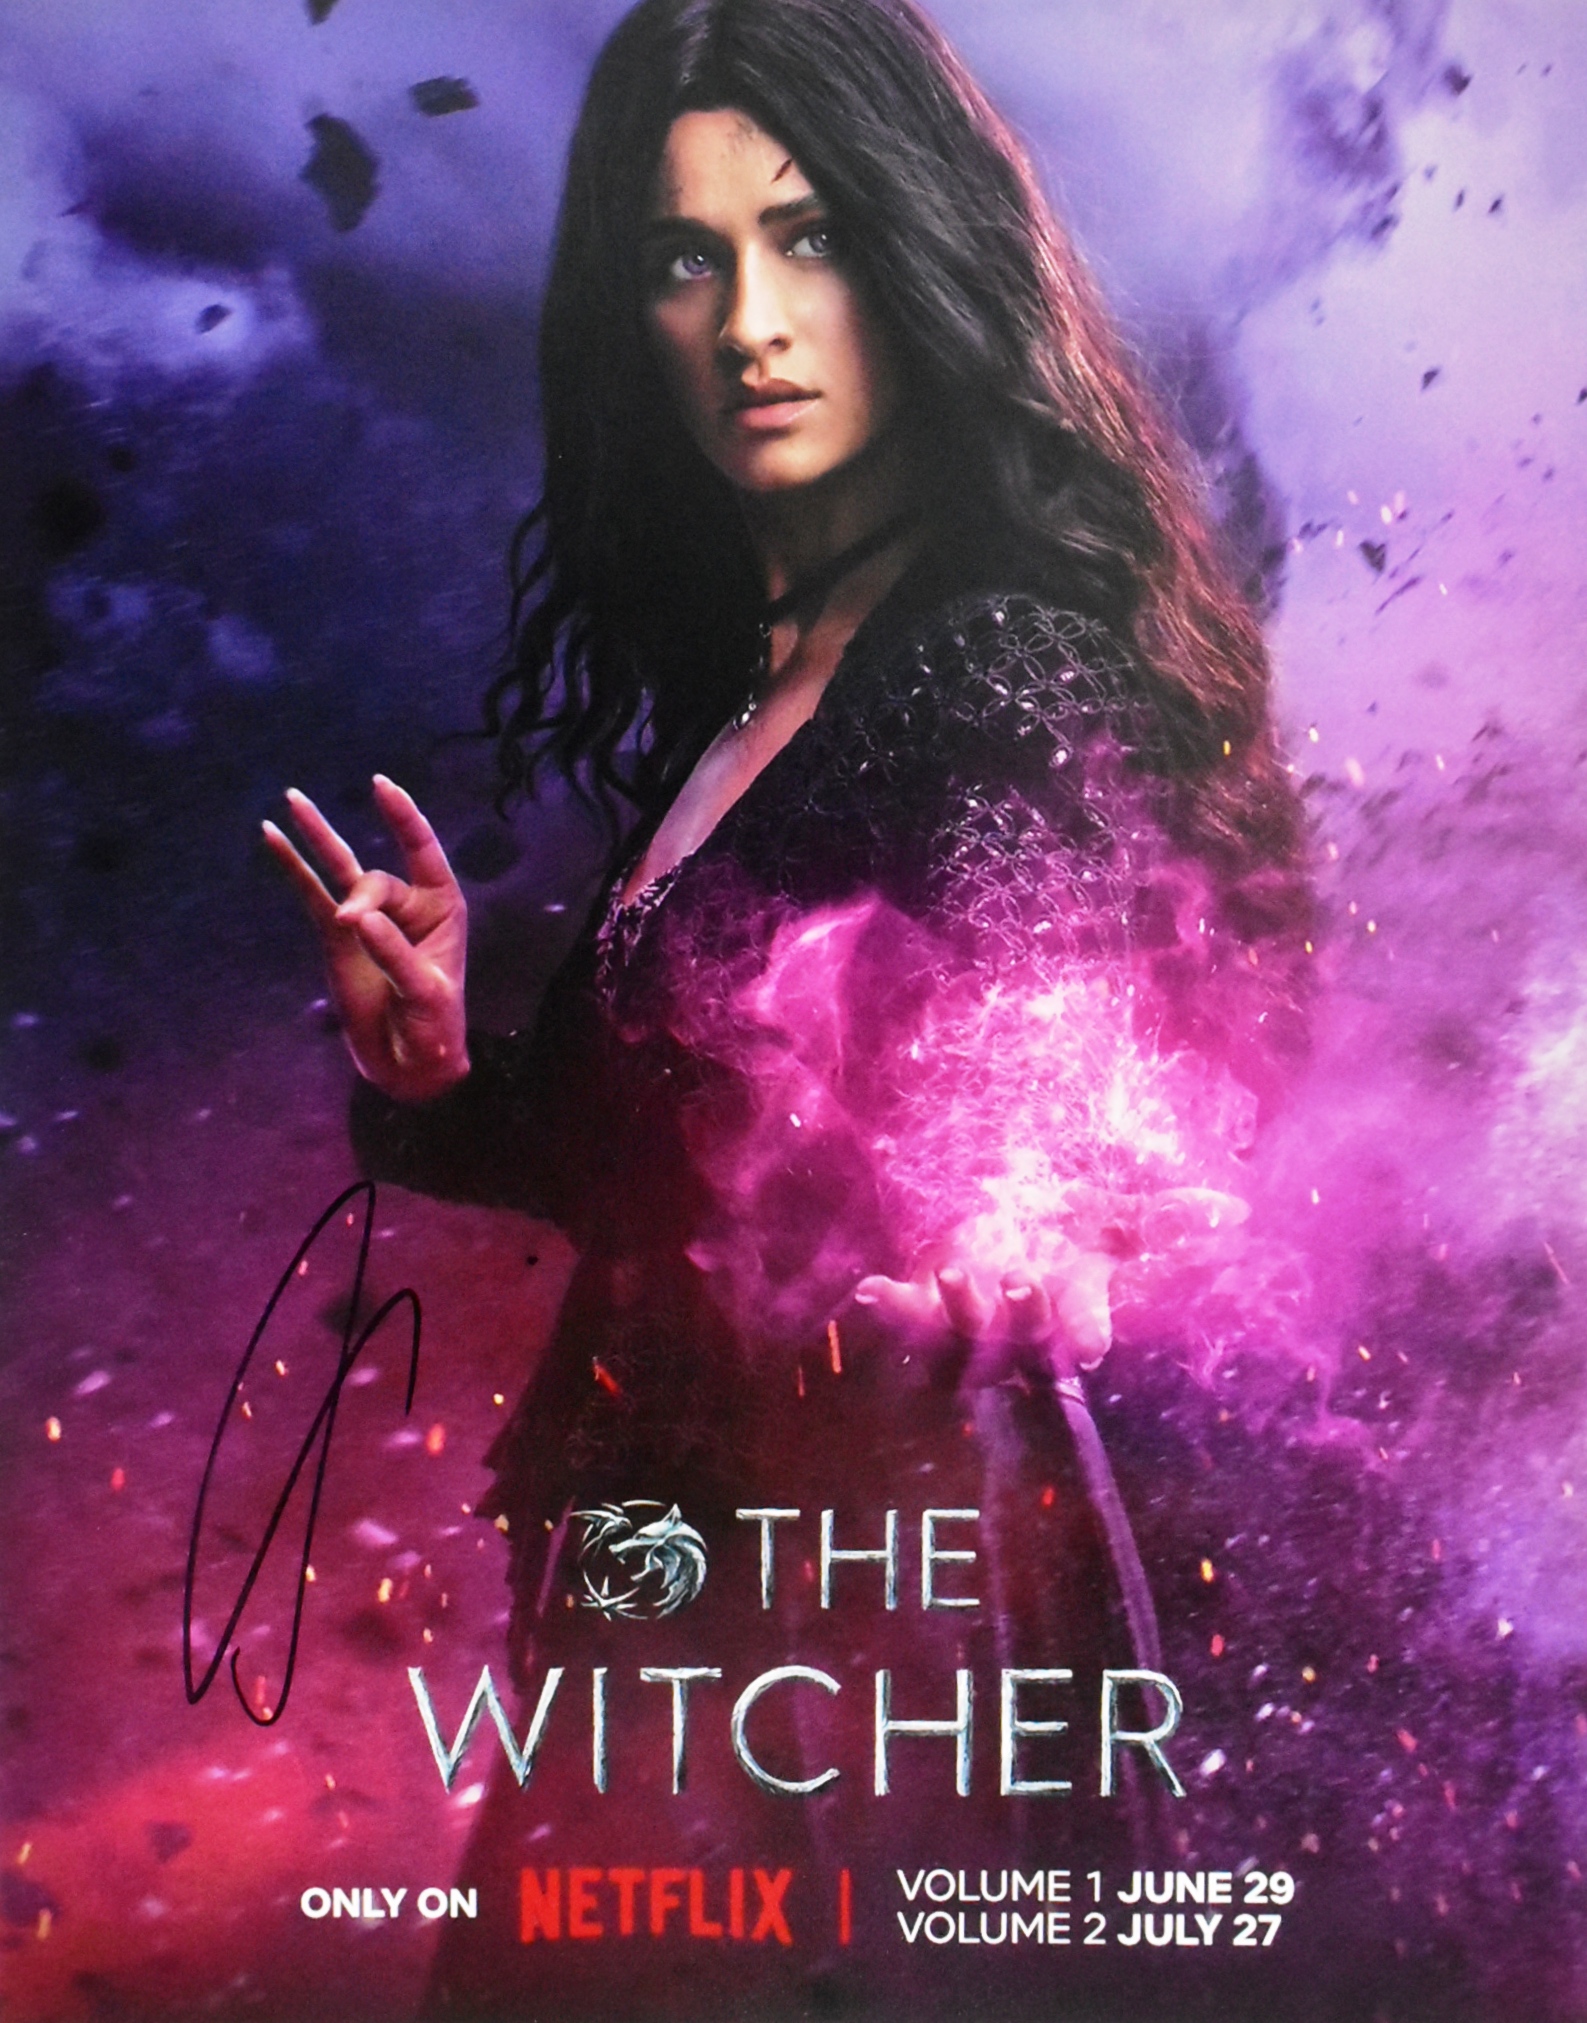 ANYA CHALOTRA - THE WITCHER - SIGNED 8X10" PHOTO - AFTAL